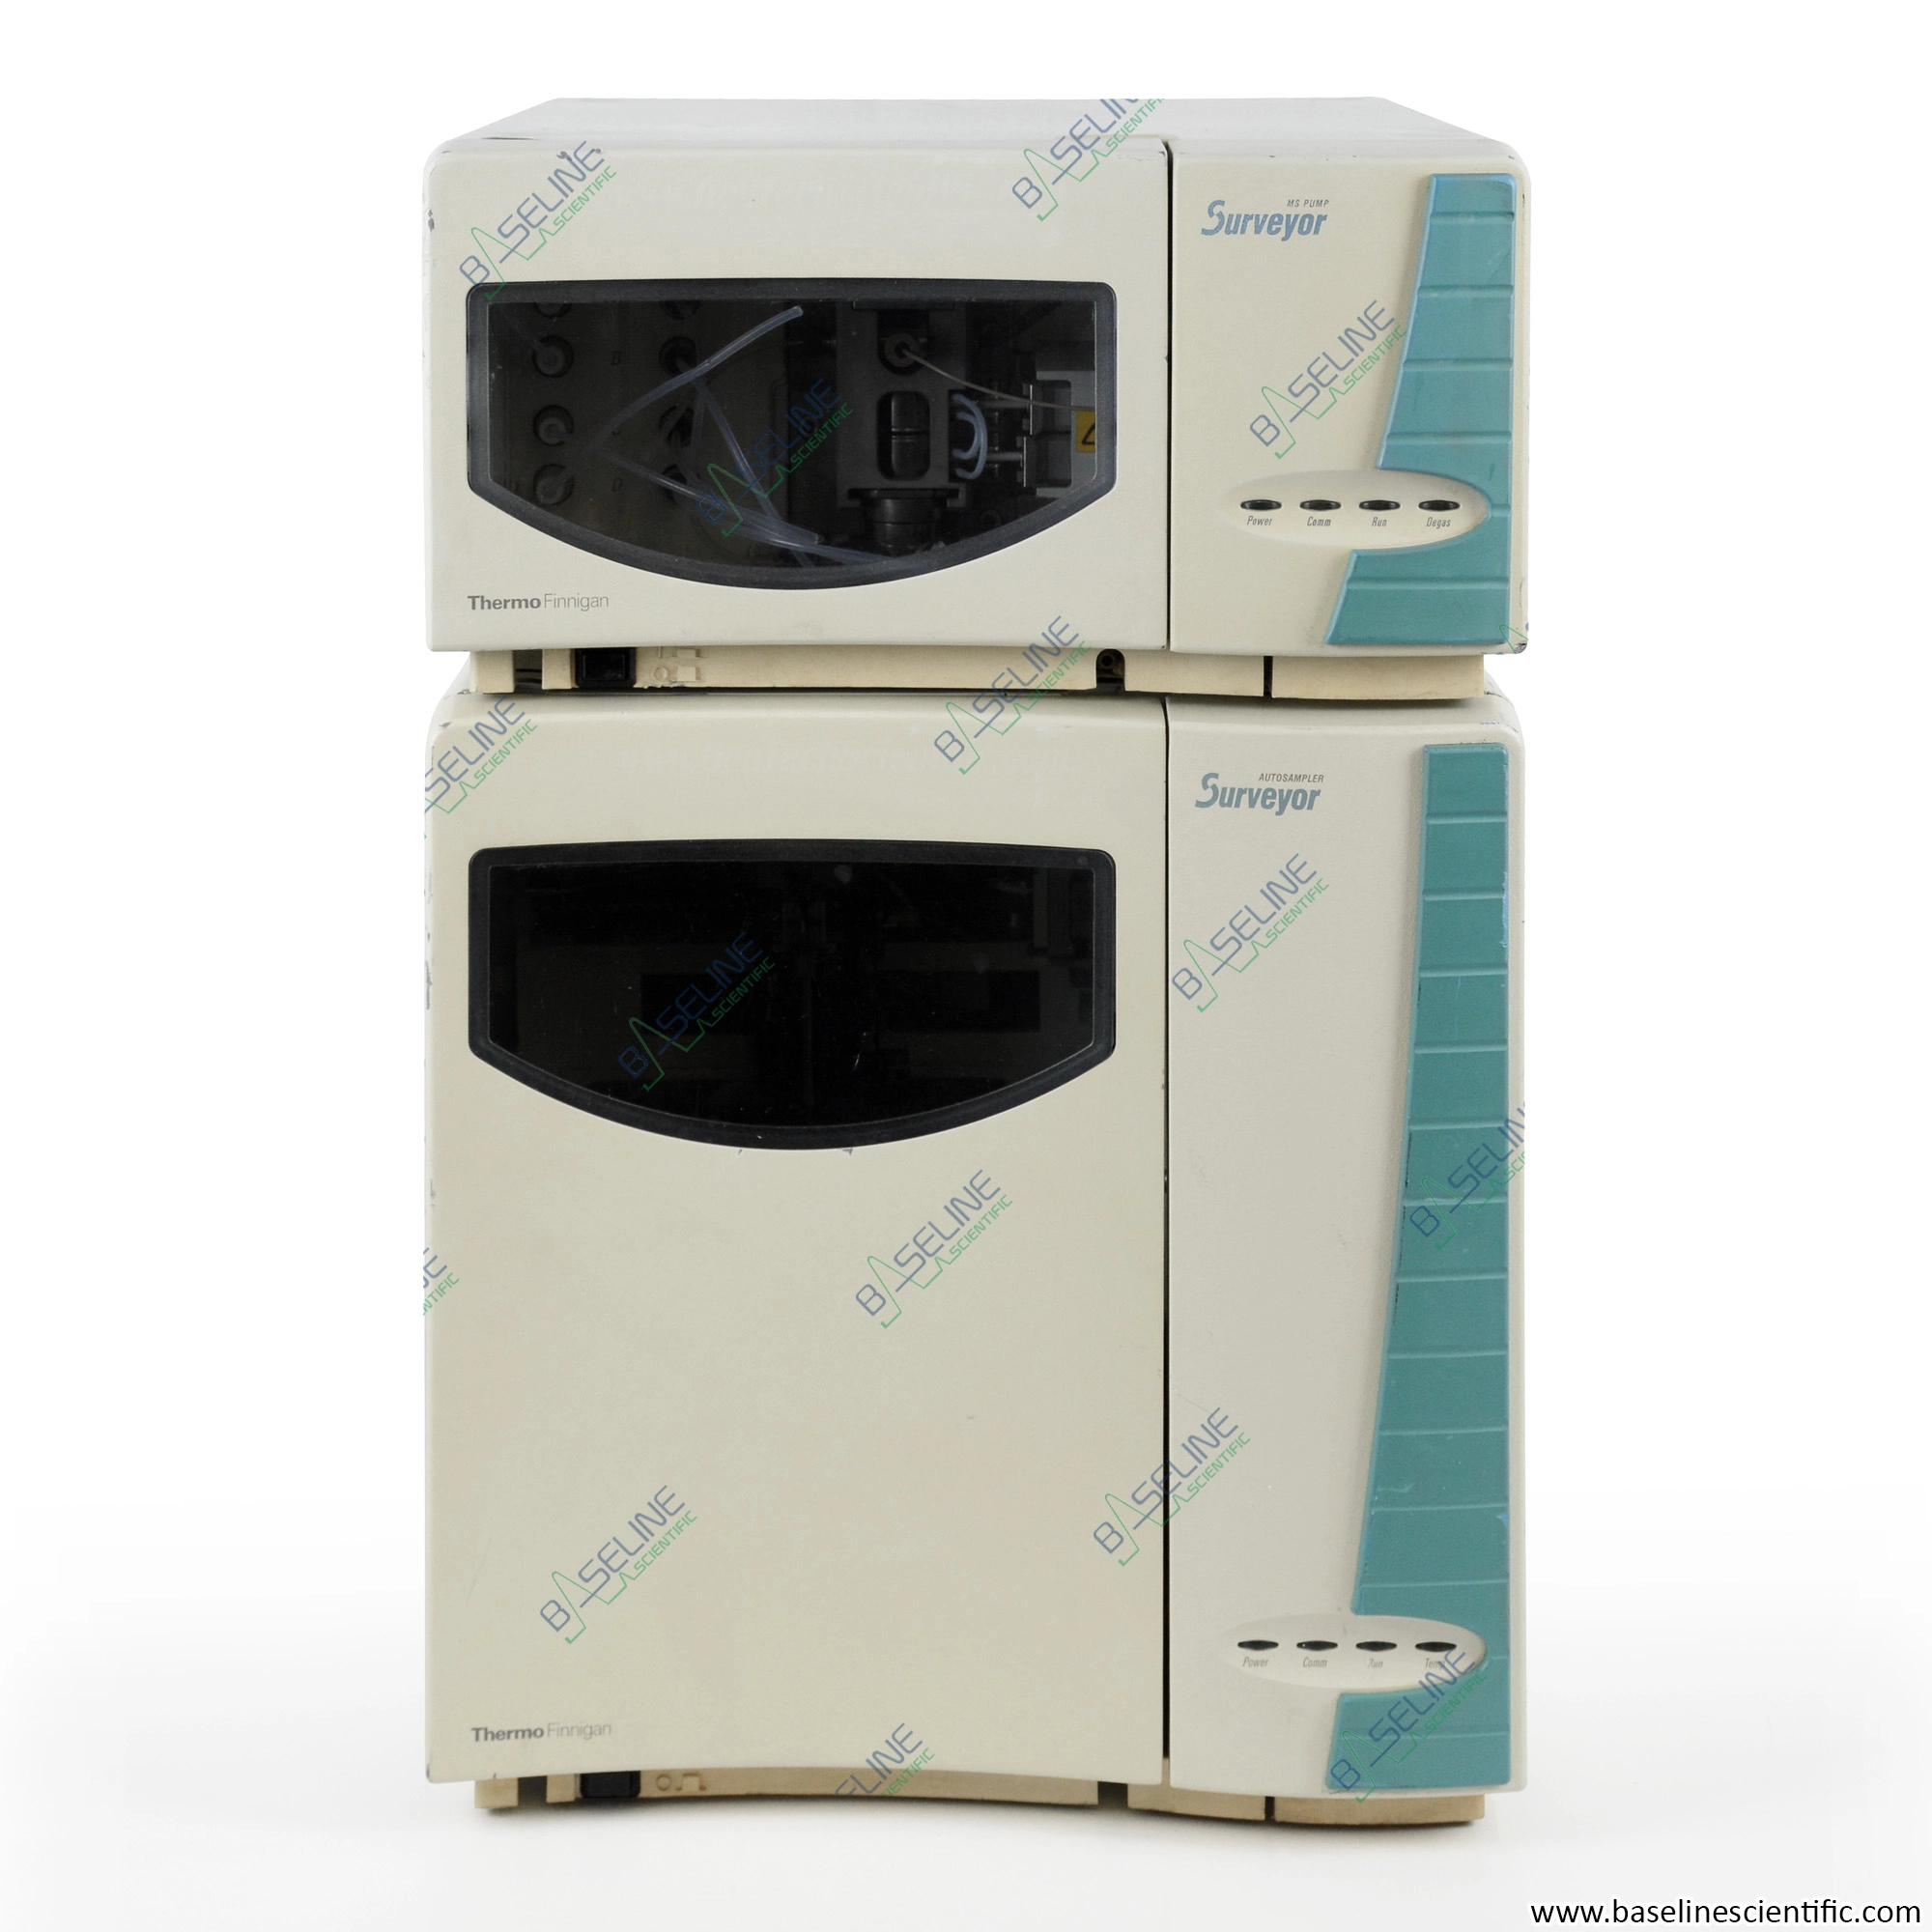 Refurbished Thermo Finnigan AutoSampler with MS Pump with ONE YEAR WARRANTY